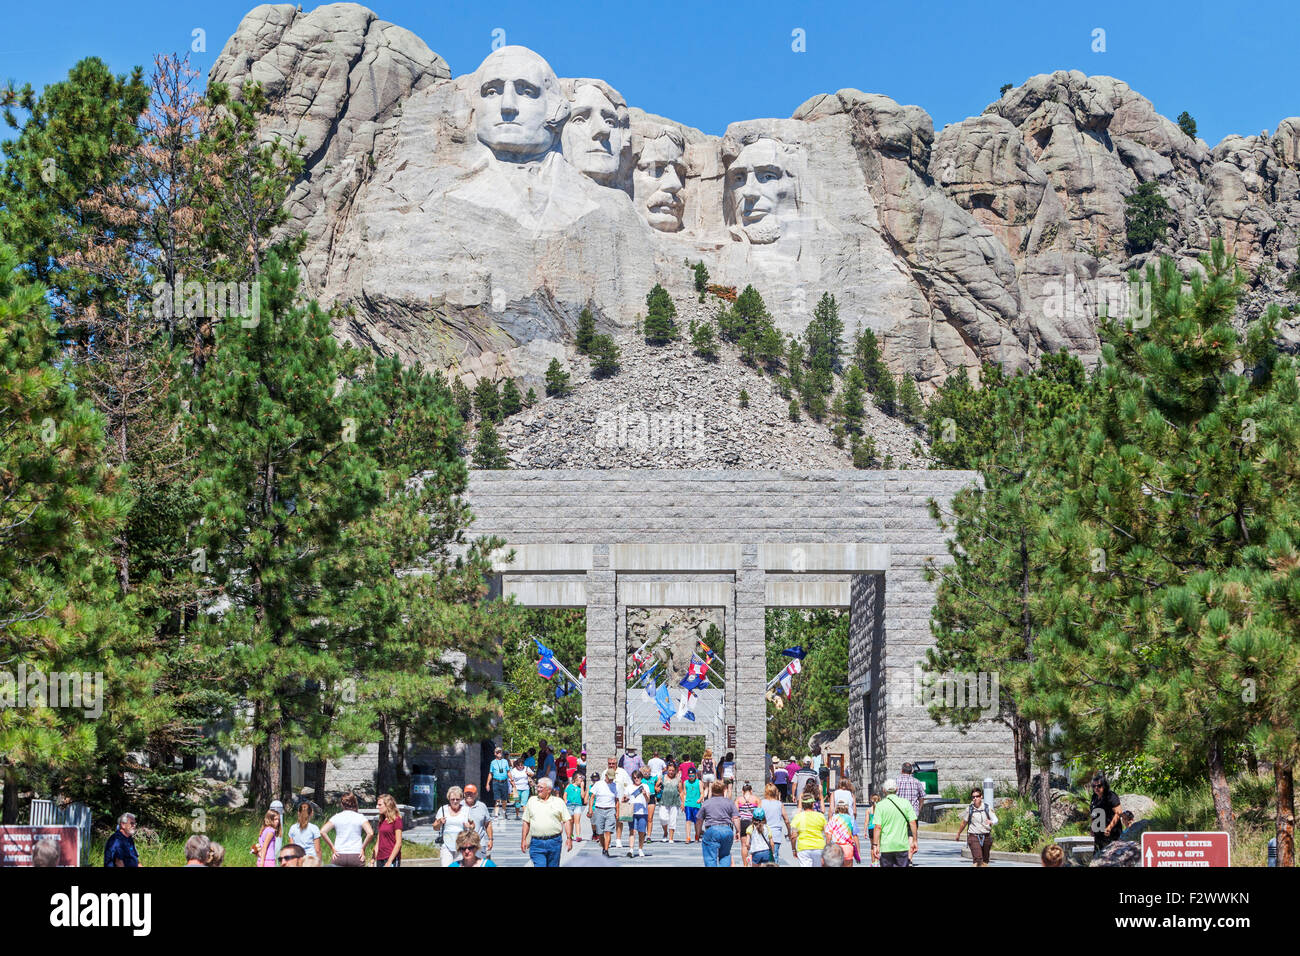 A view of visitors, tourists, families seeing the Mount Rushmore National Memorial, South Dakota. Stock Photo